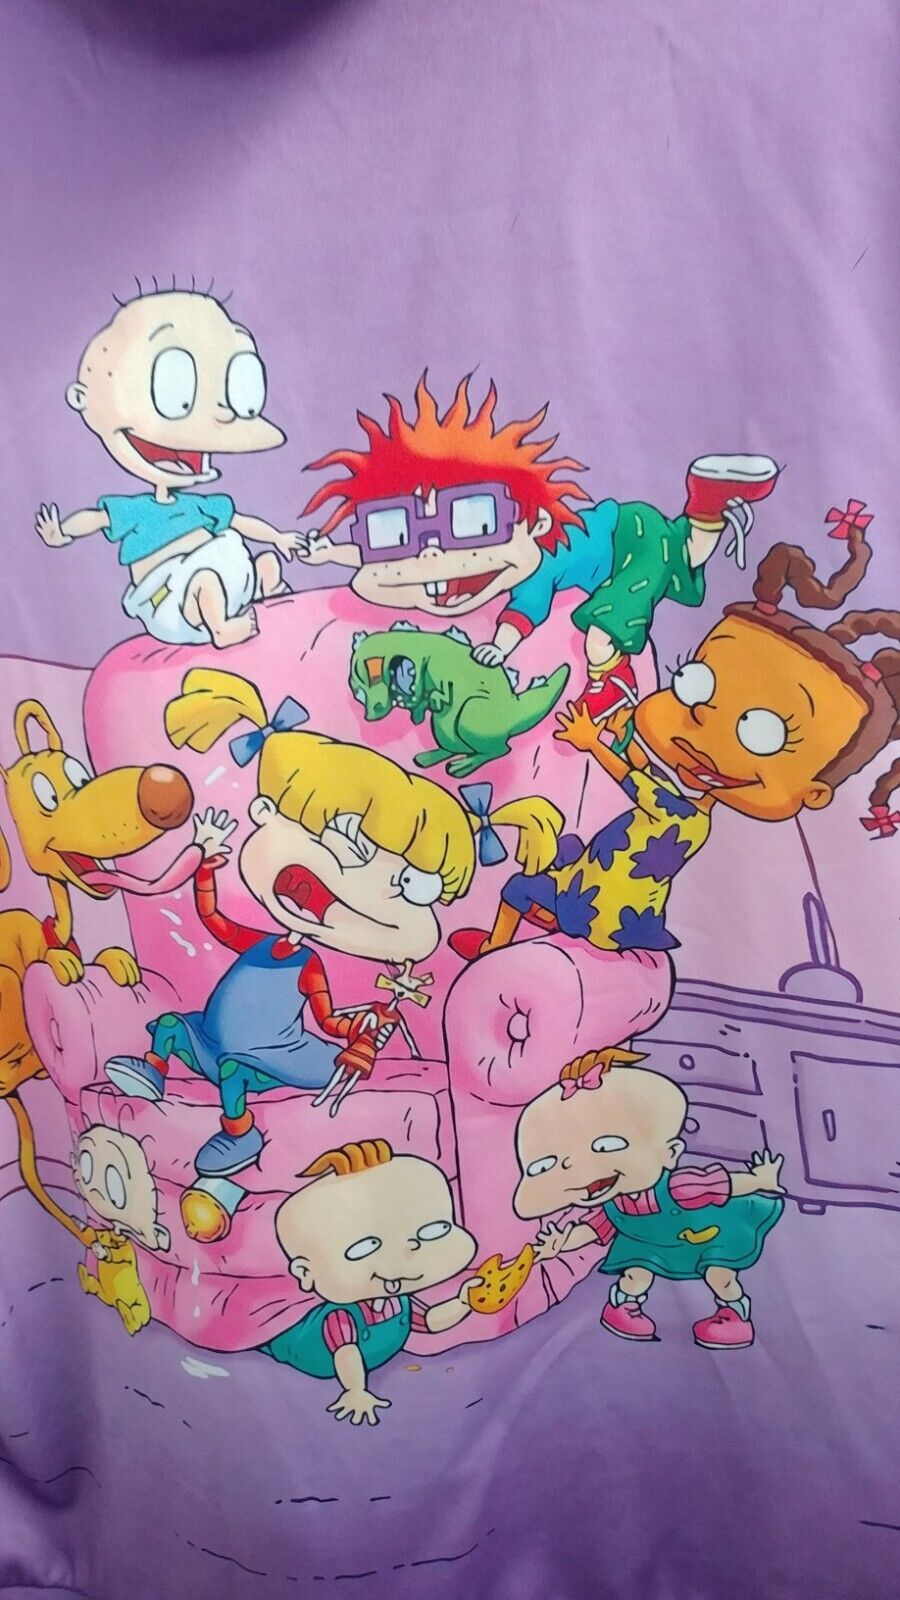 The rugrats are all on the couch together - Rugrats